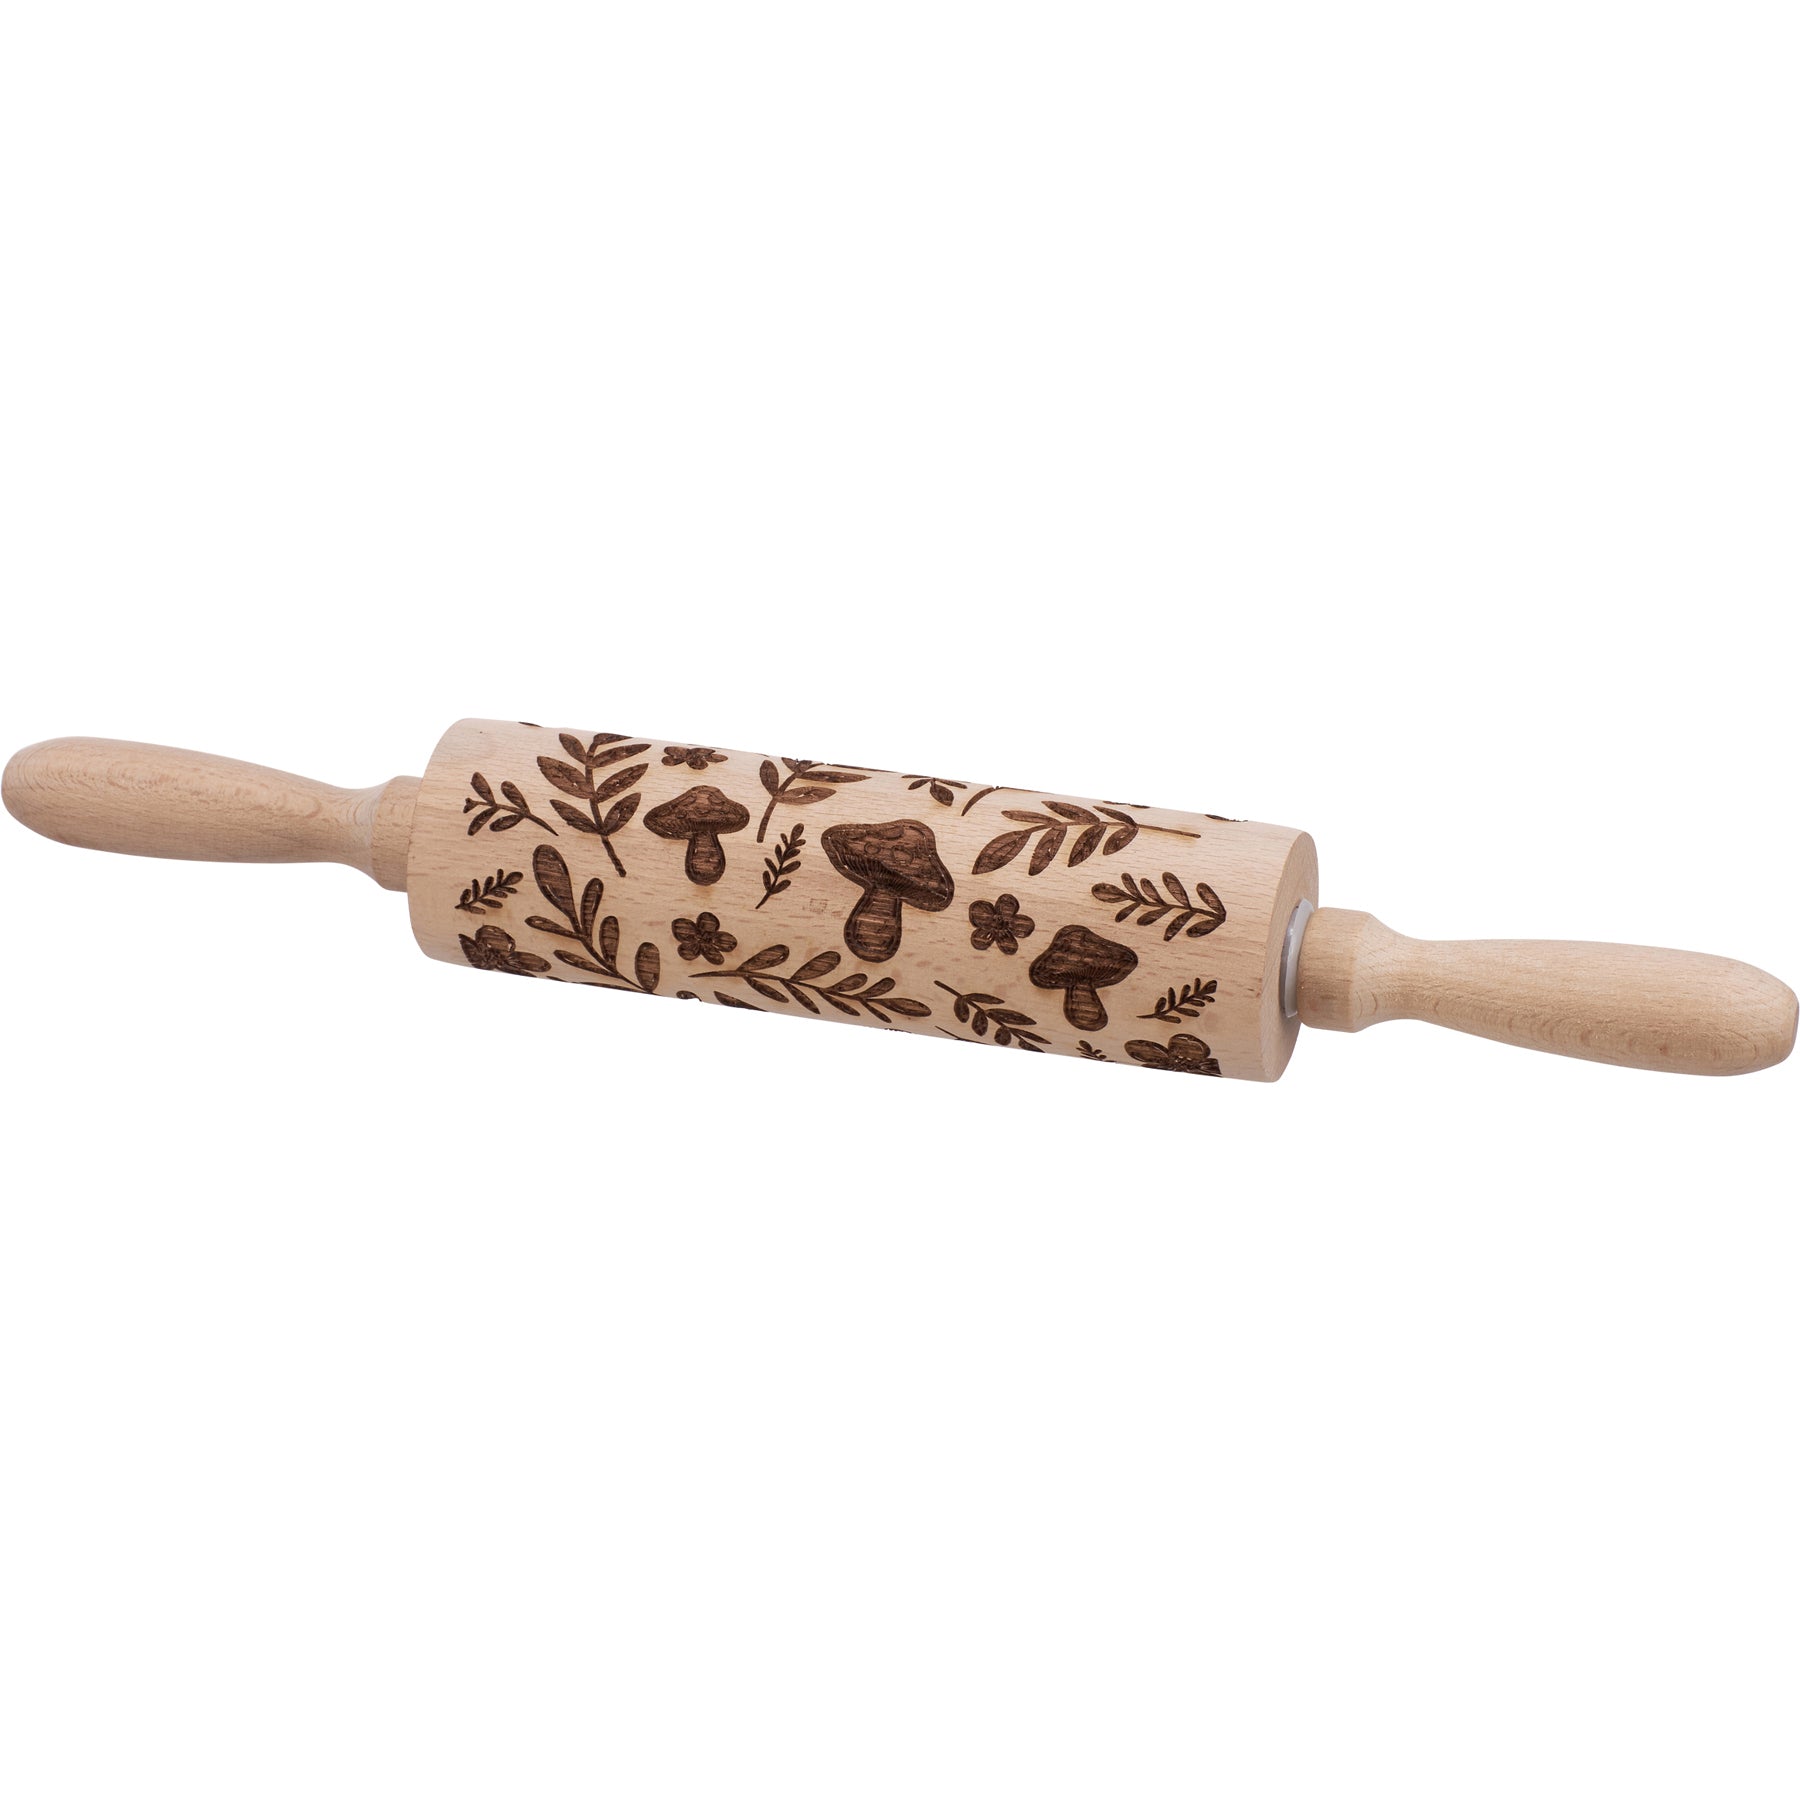 Mushrooms Small Embossing Rolling Pin | Creates Mushrooms and Florals Design